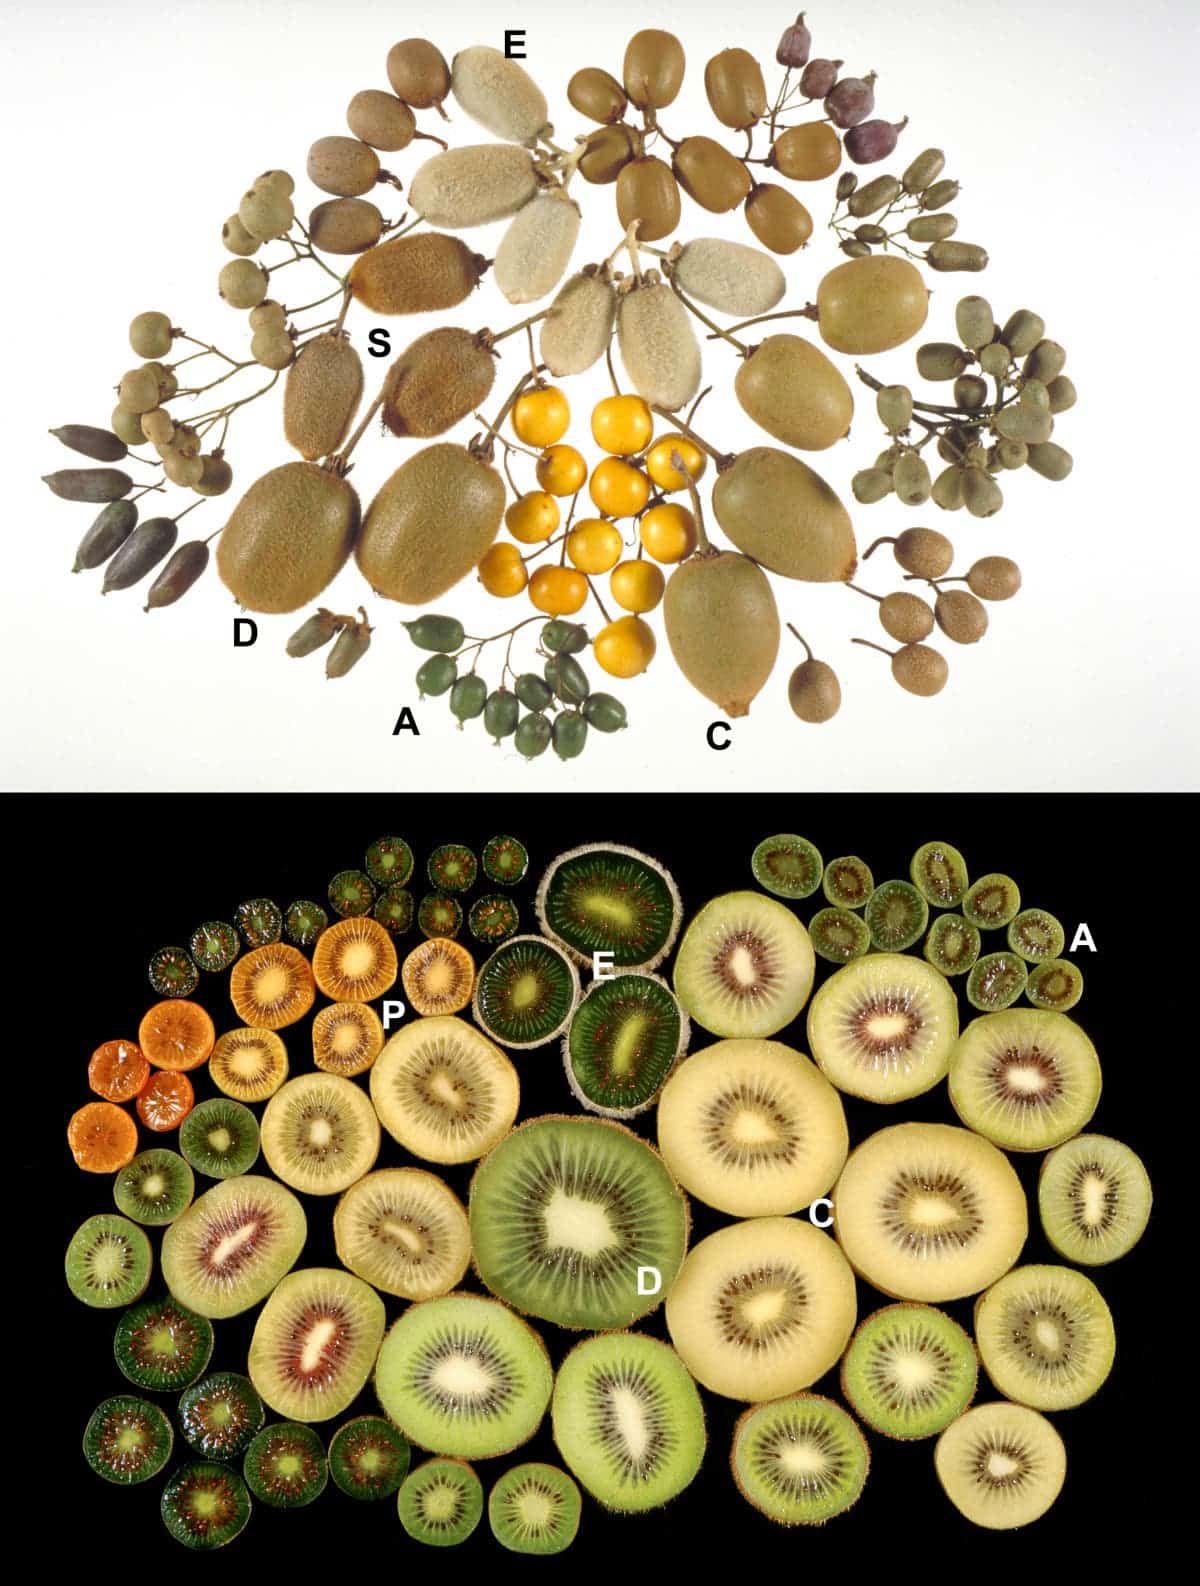 Fruits of different kiwi species.